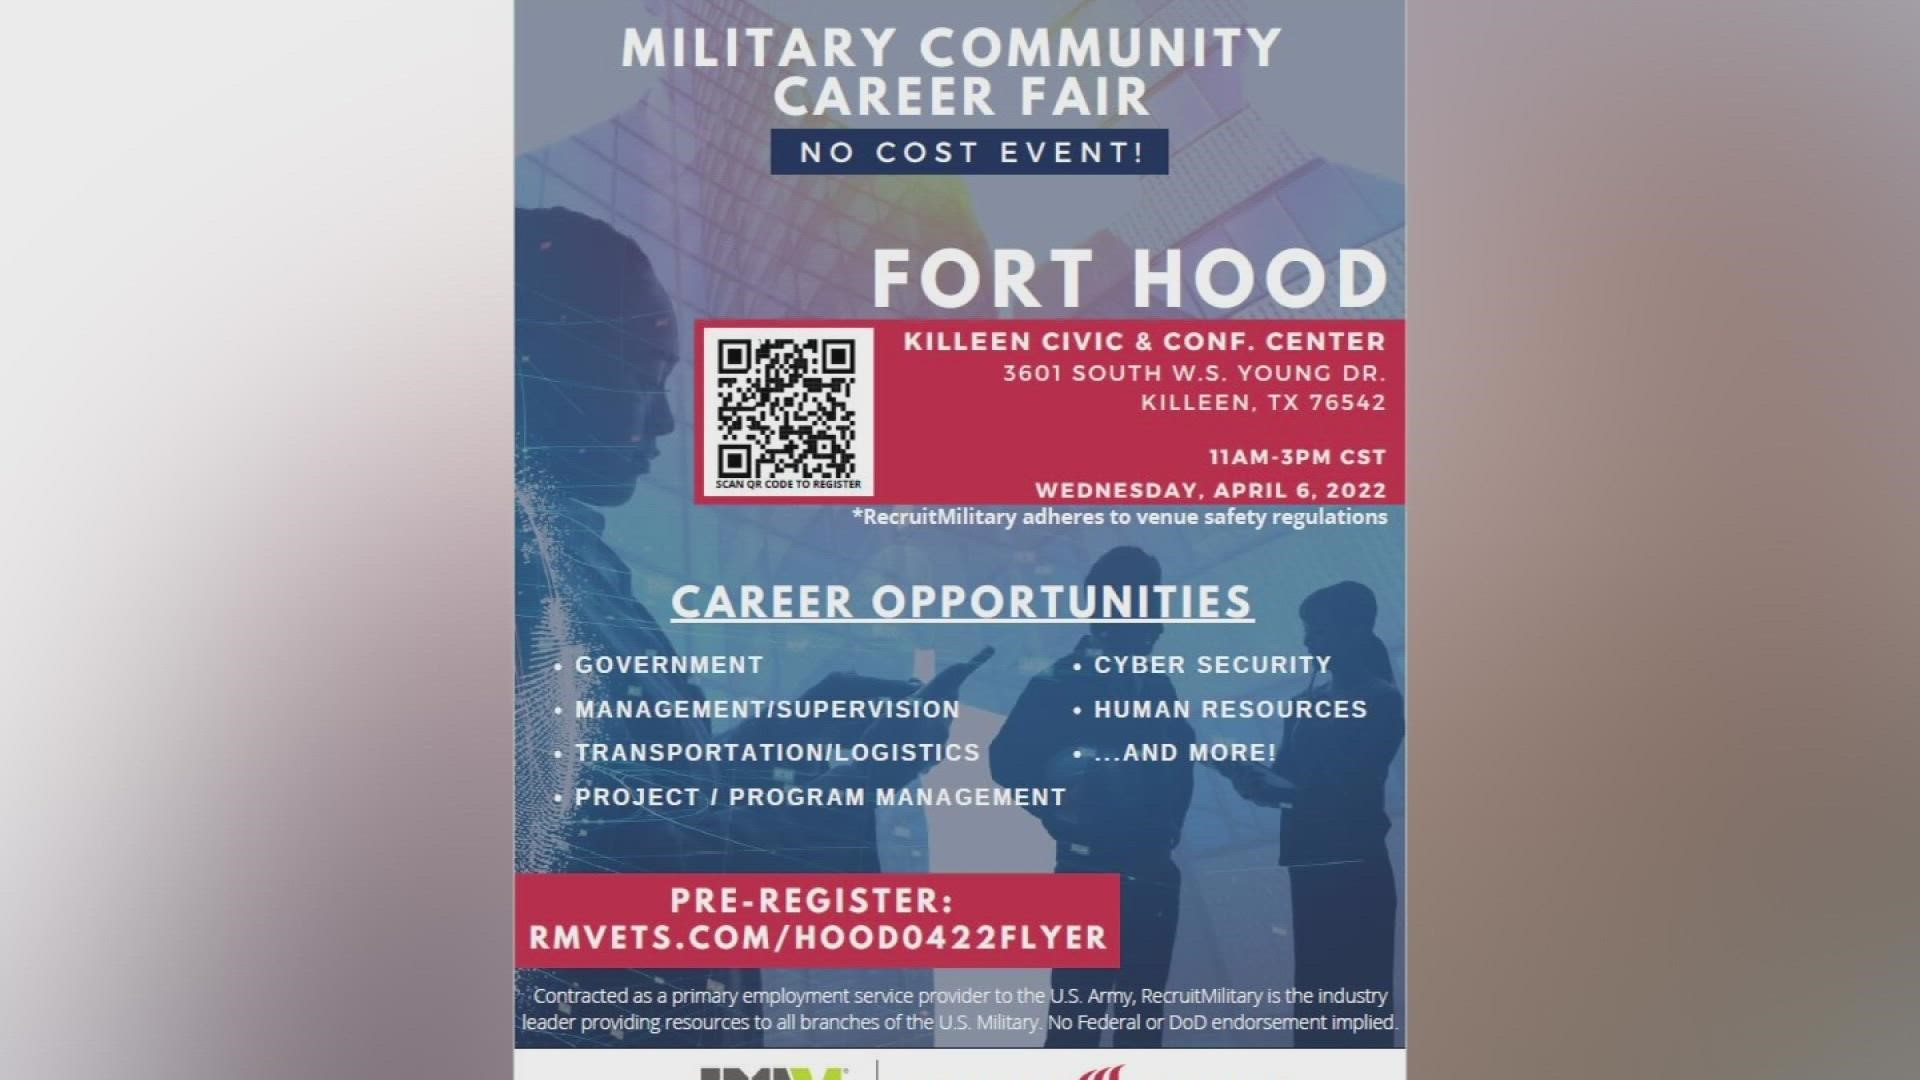 The job fair will be held at the Killeen Civic and Concert Center.